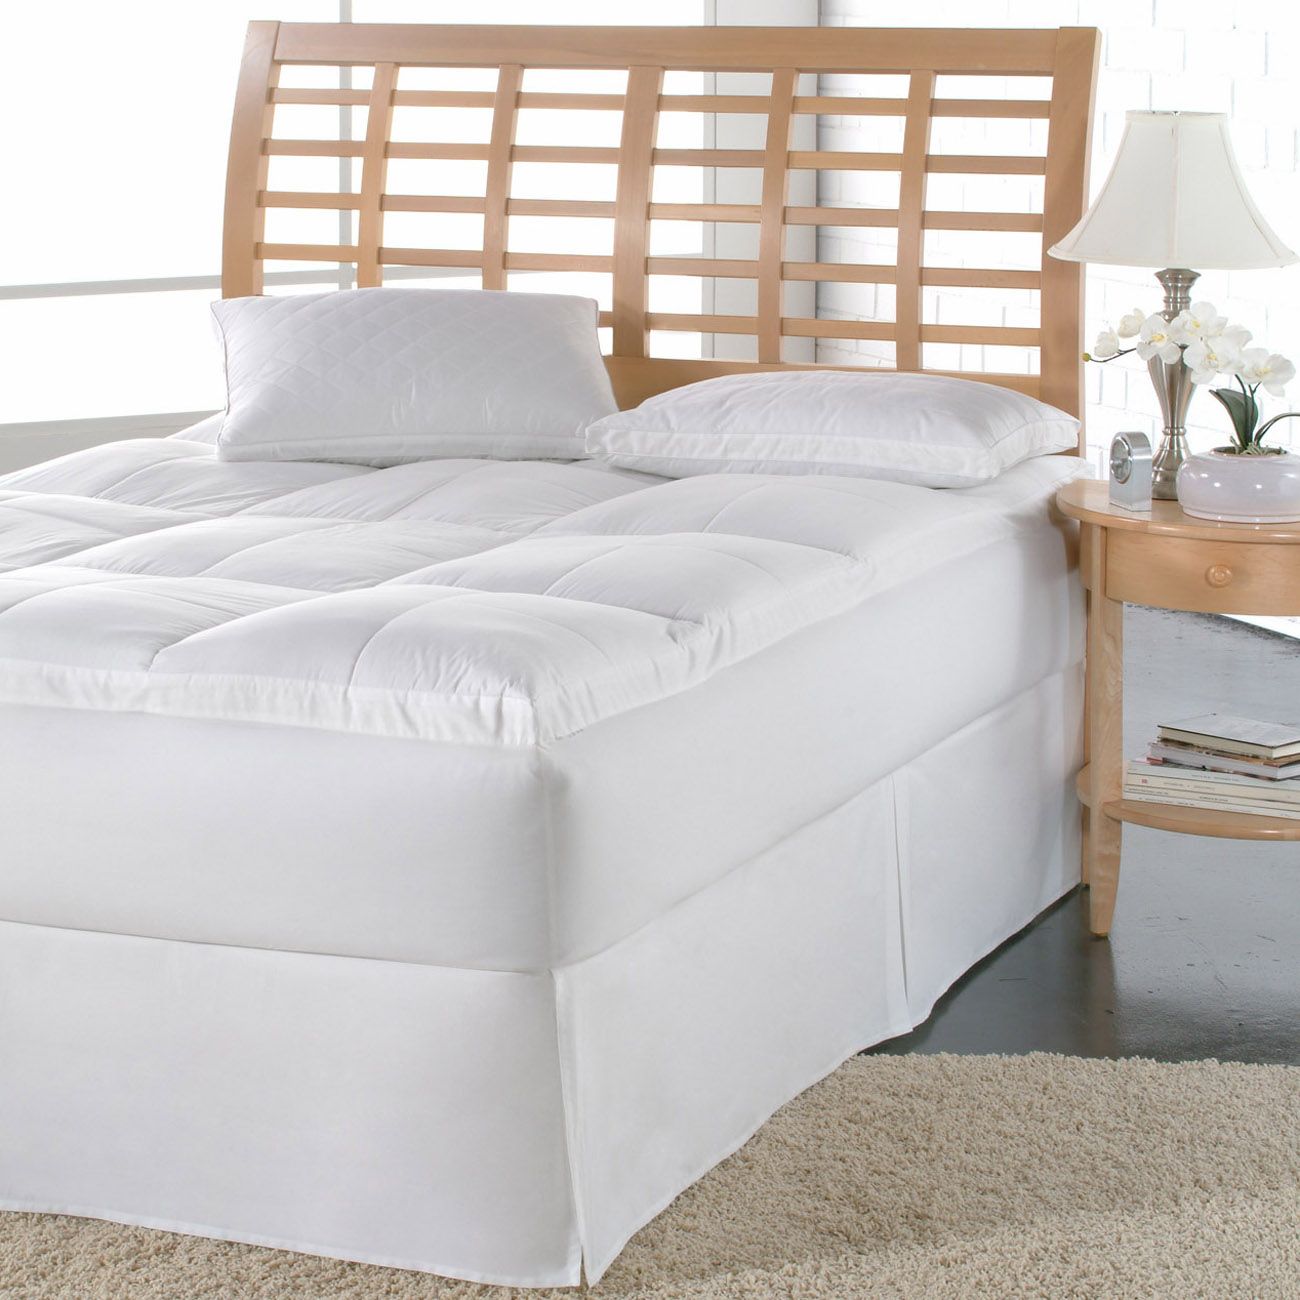 OOdles Mattress Topper with Skirt